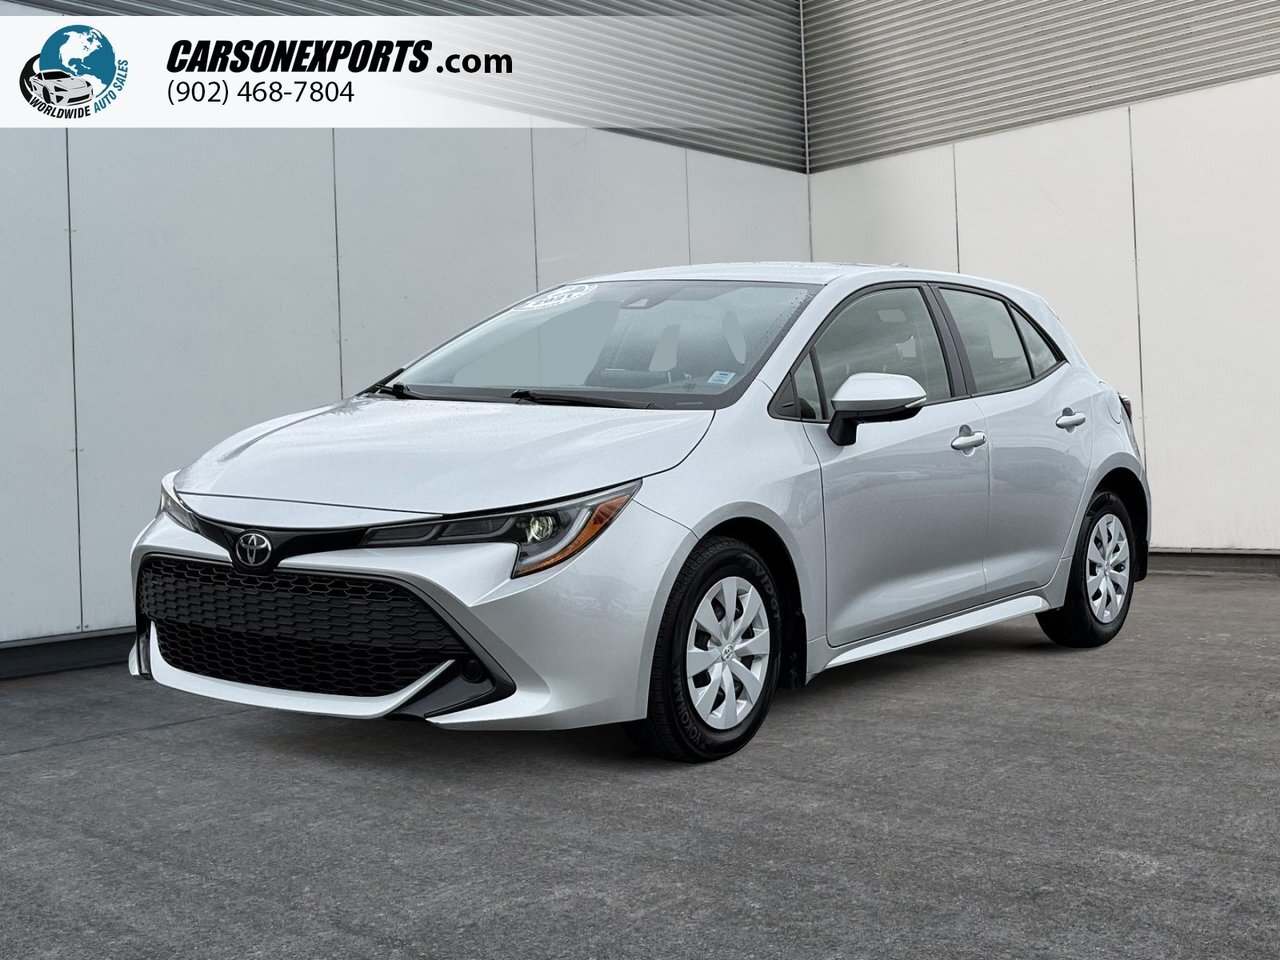 2021 Toyota Corolla Hatchback Base The best place to buy a used car. Period.